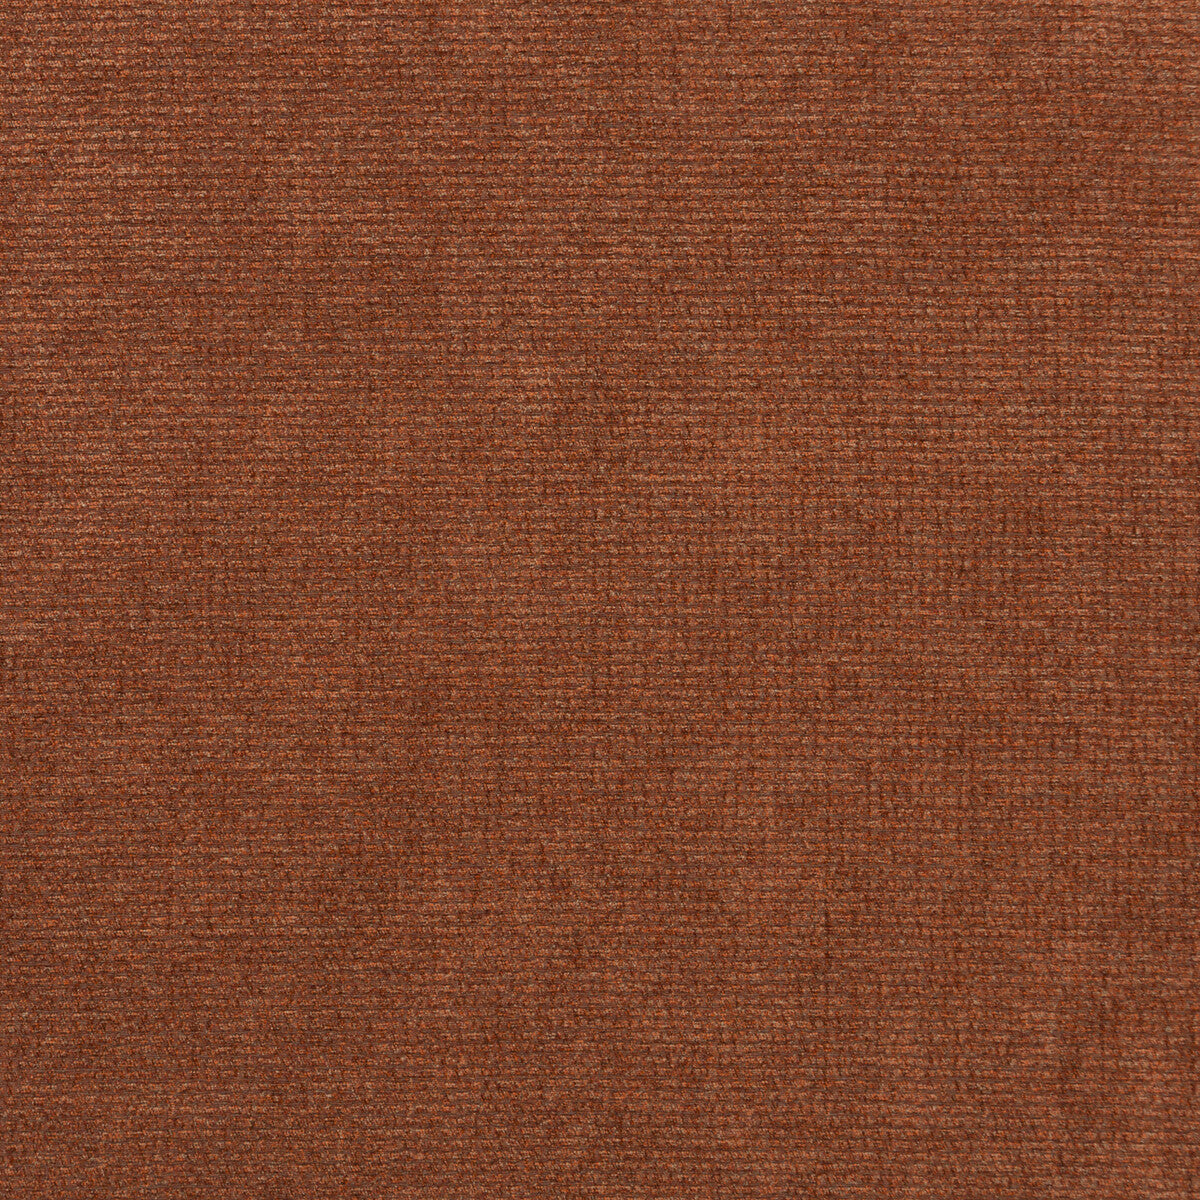 Matrix fabric in spice color - pattern BF10686.330.0 - by G P &amp; J Baker in the Essential Colours collection